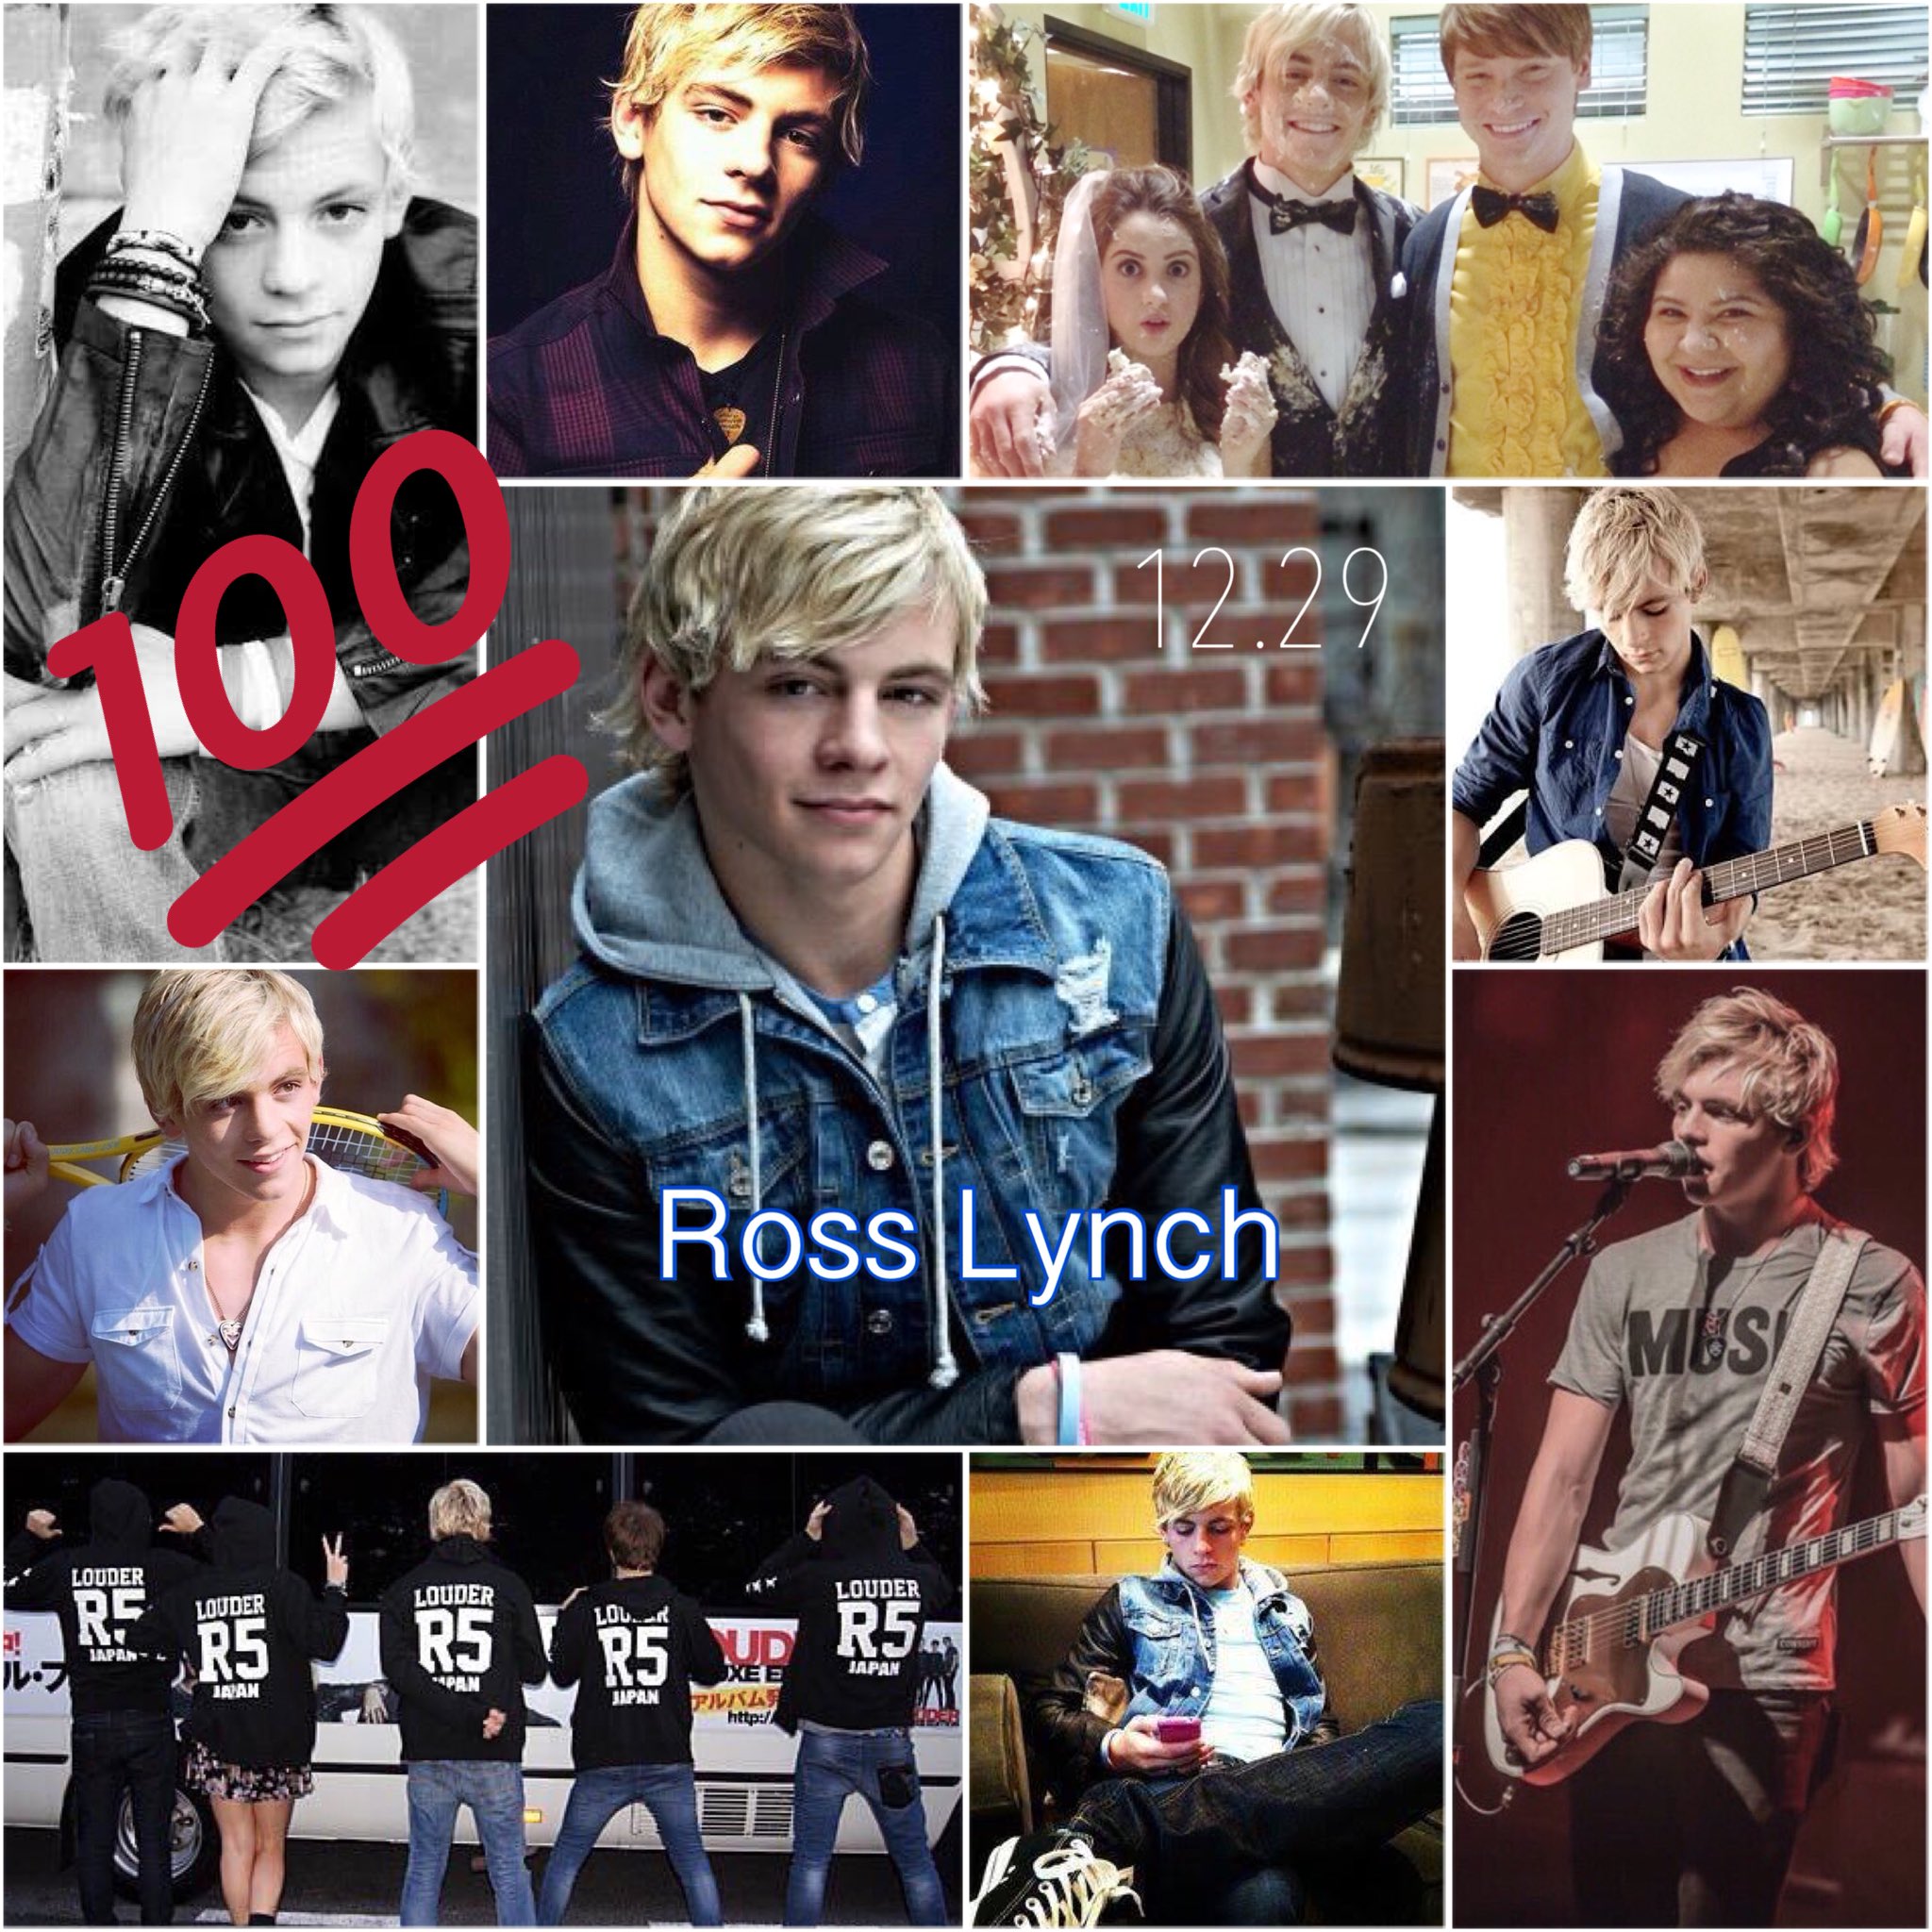  Ross Lynch Happy Birthday I LOVE YOU SO MUCH I WANT TO MEET YOU  from Japanese fan  